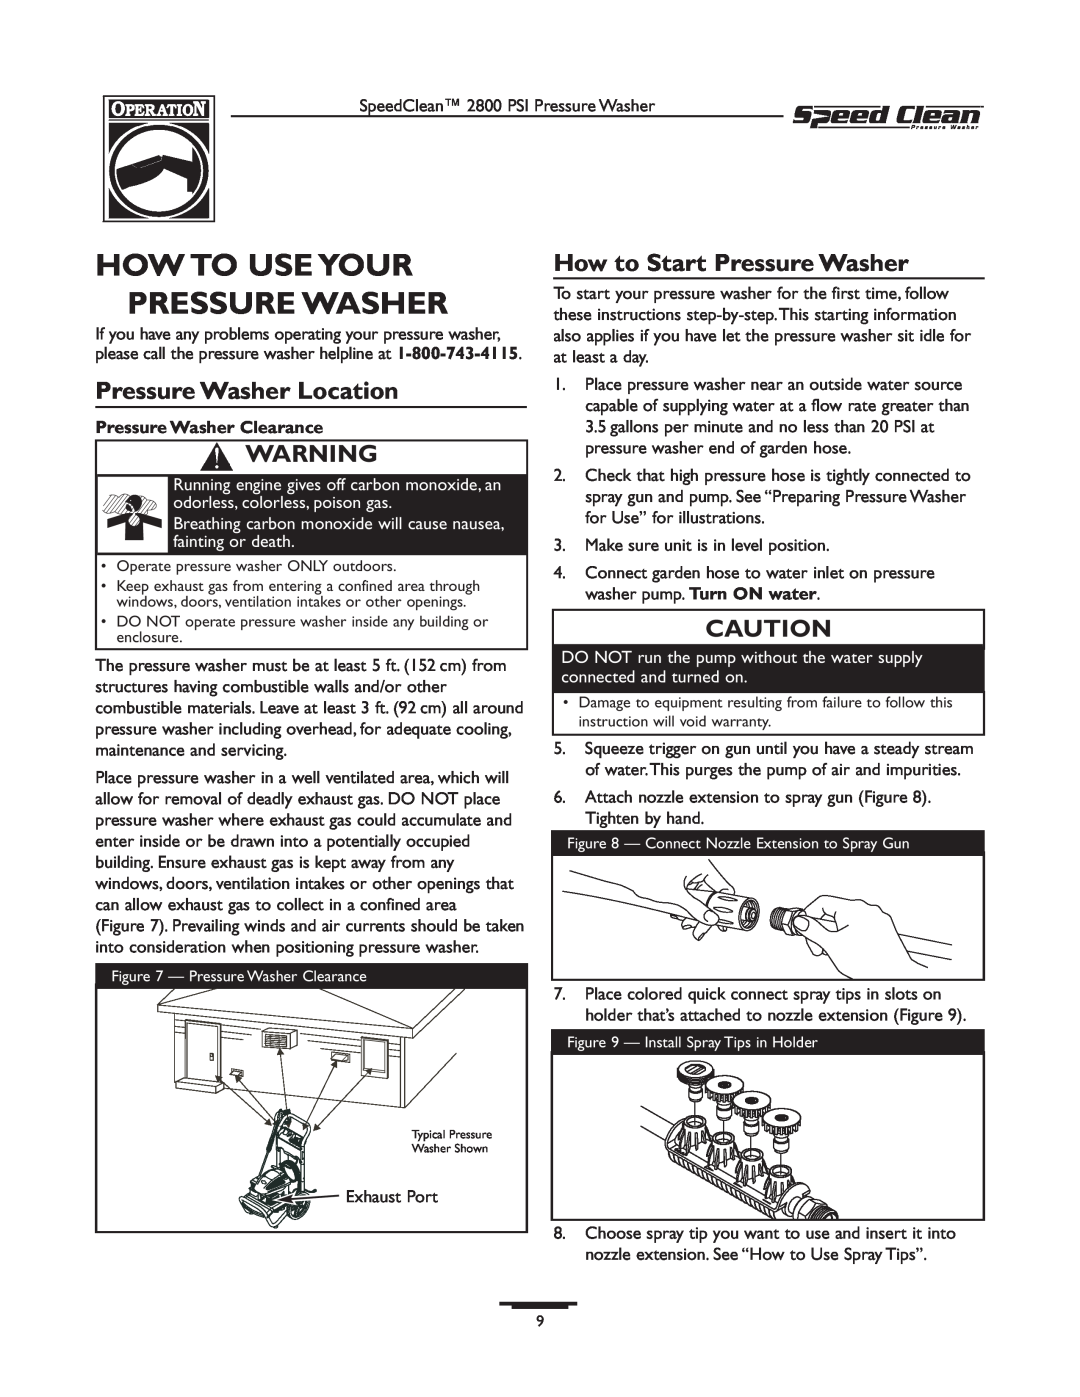 Briggs & Stratton 020212-0 How To Use Your Pressure Washer, Pressure Washer Location, How to Start Pressure Washer 